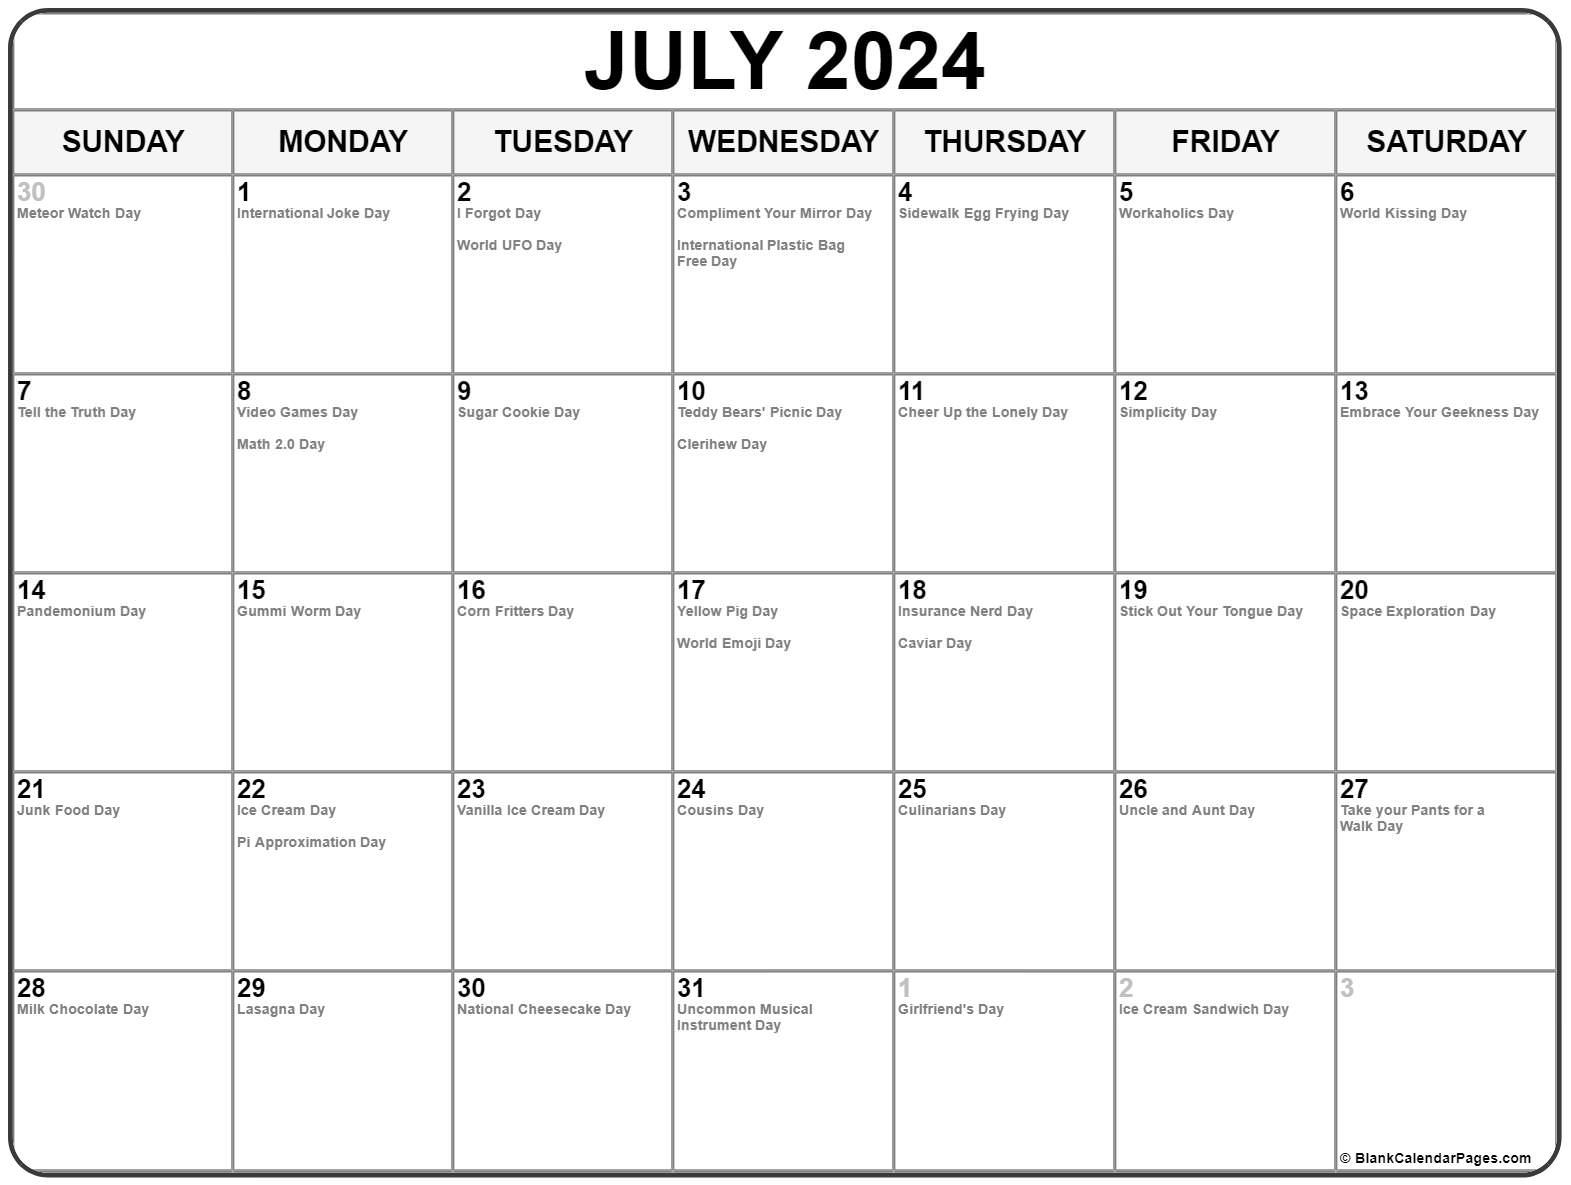 Collection Of July 2020 Calendars With Holidays